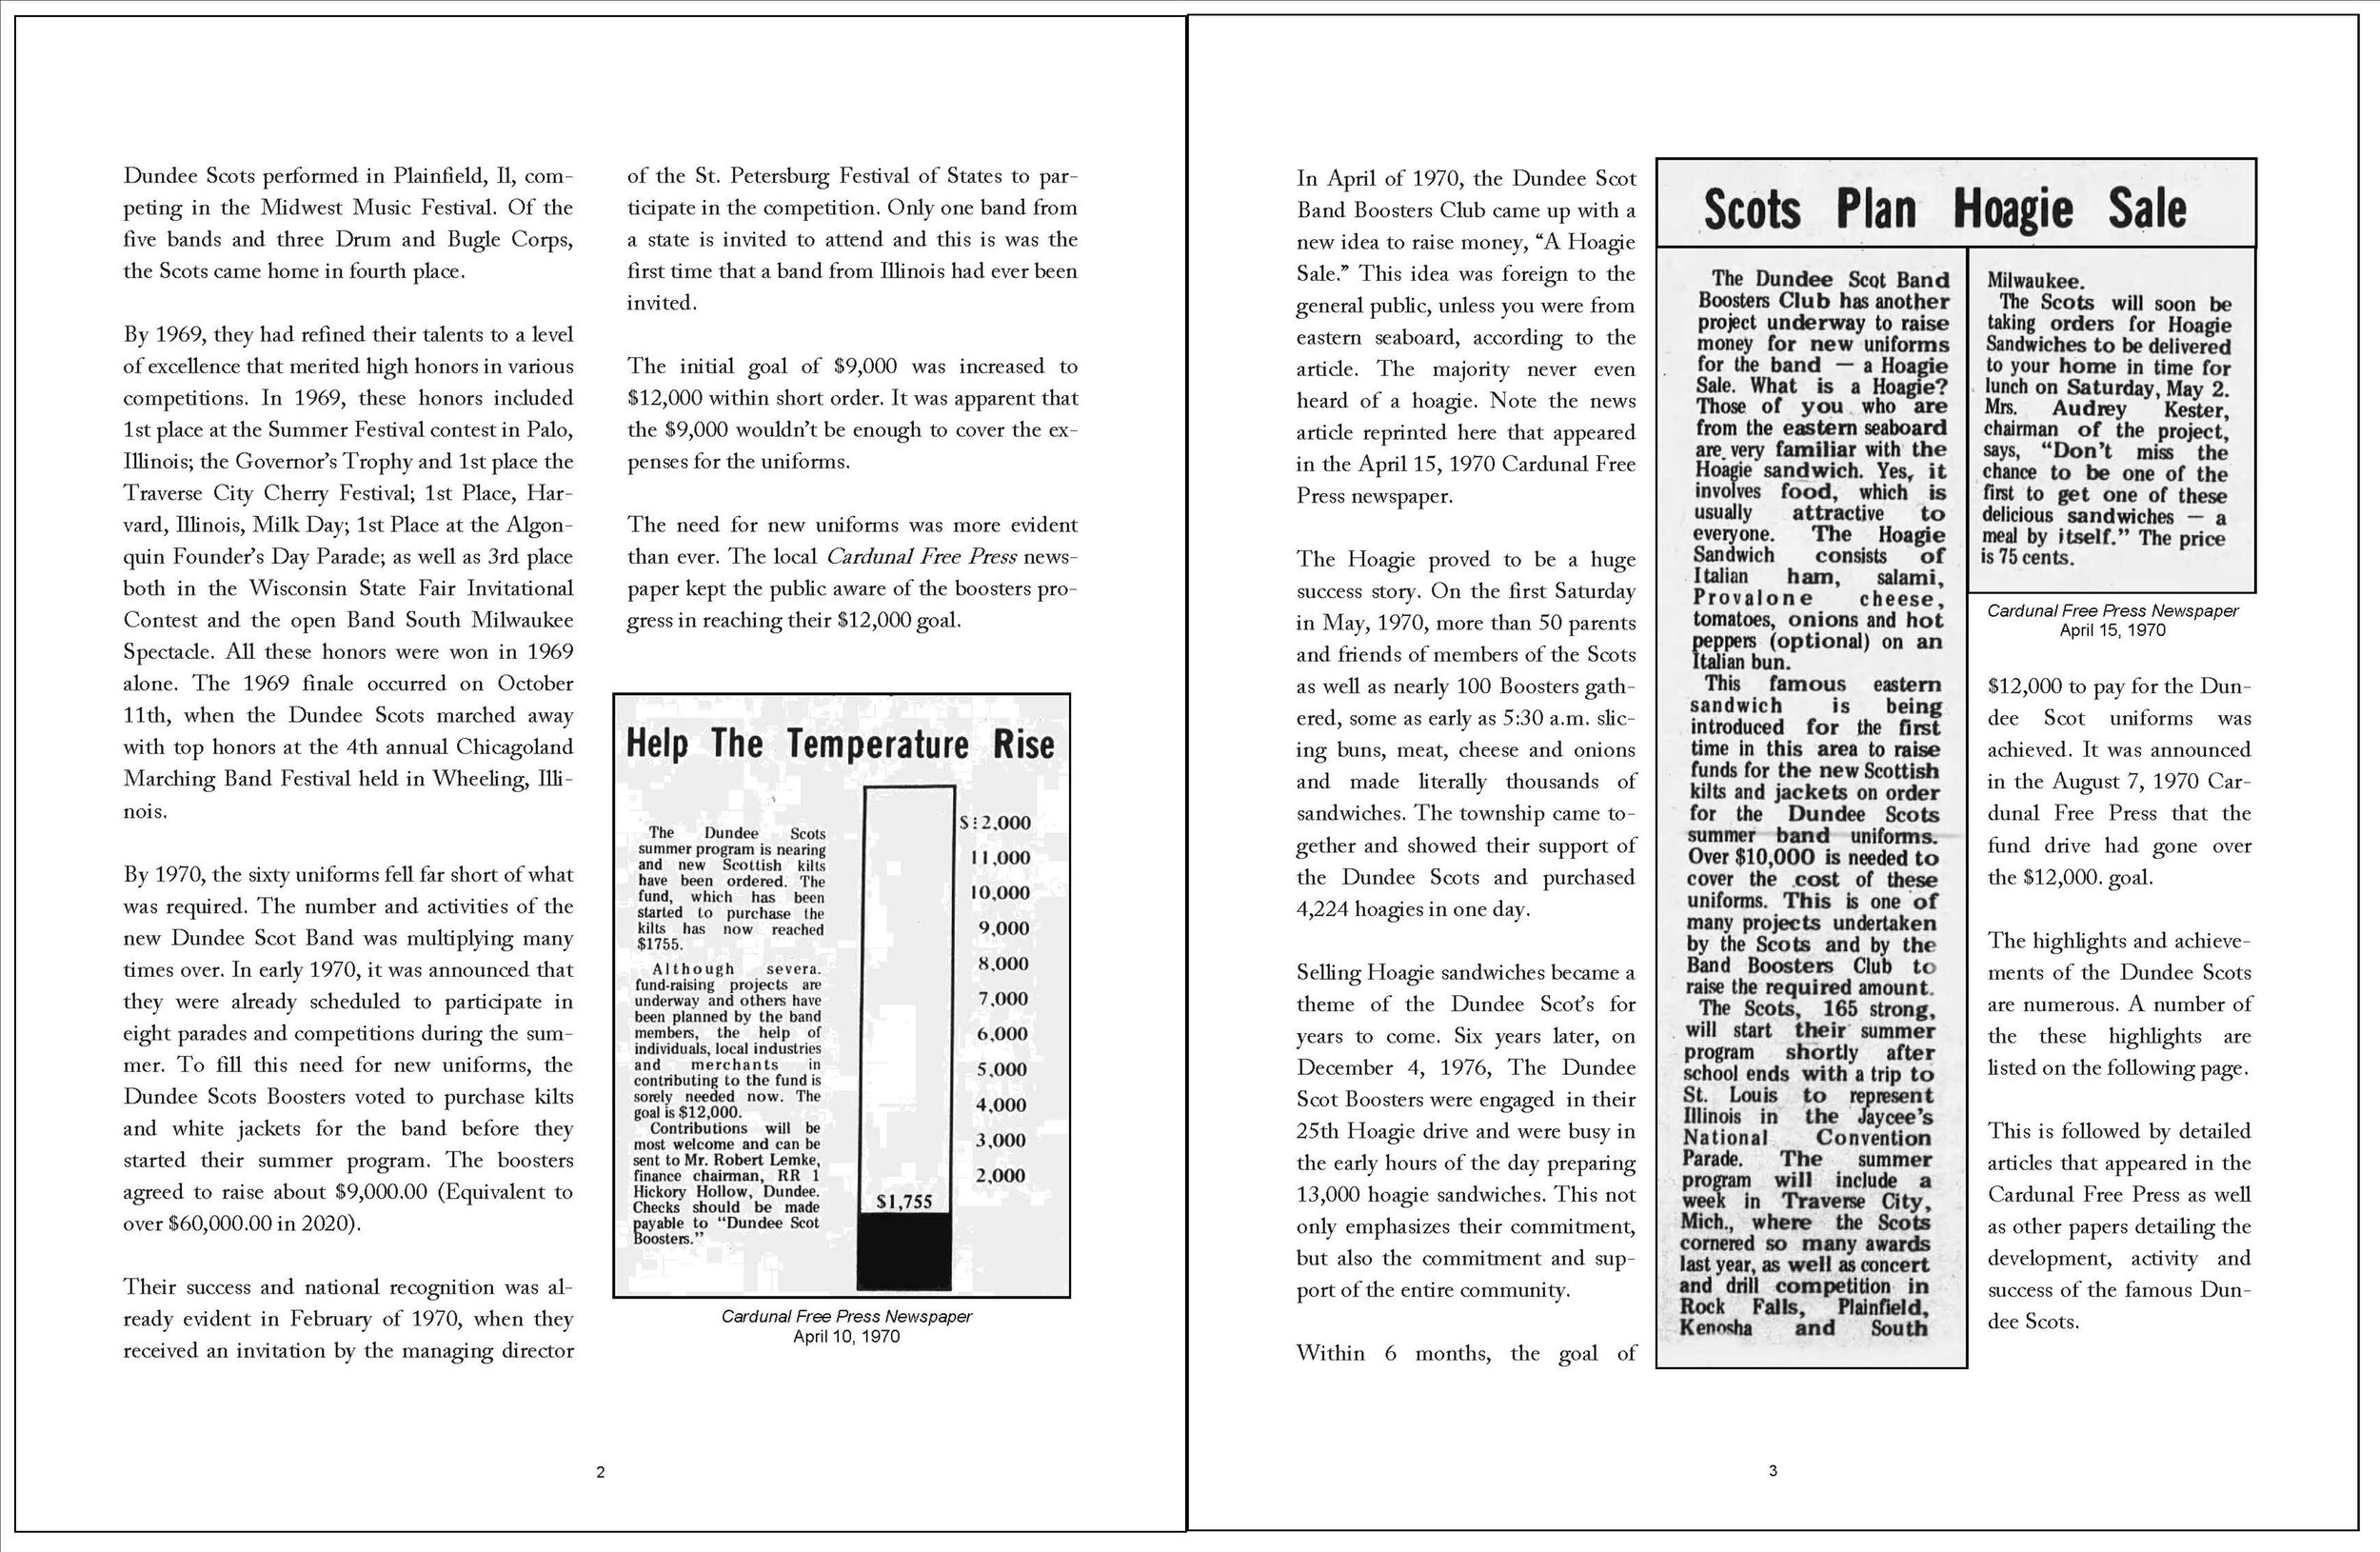 Pages 2 & 3.jpg